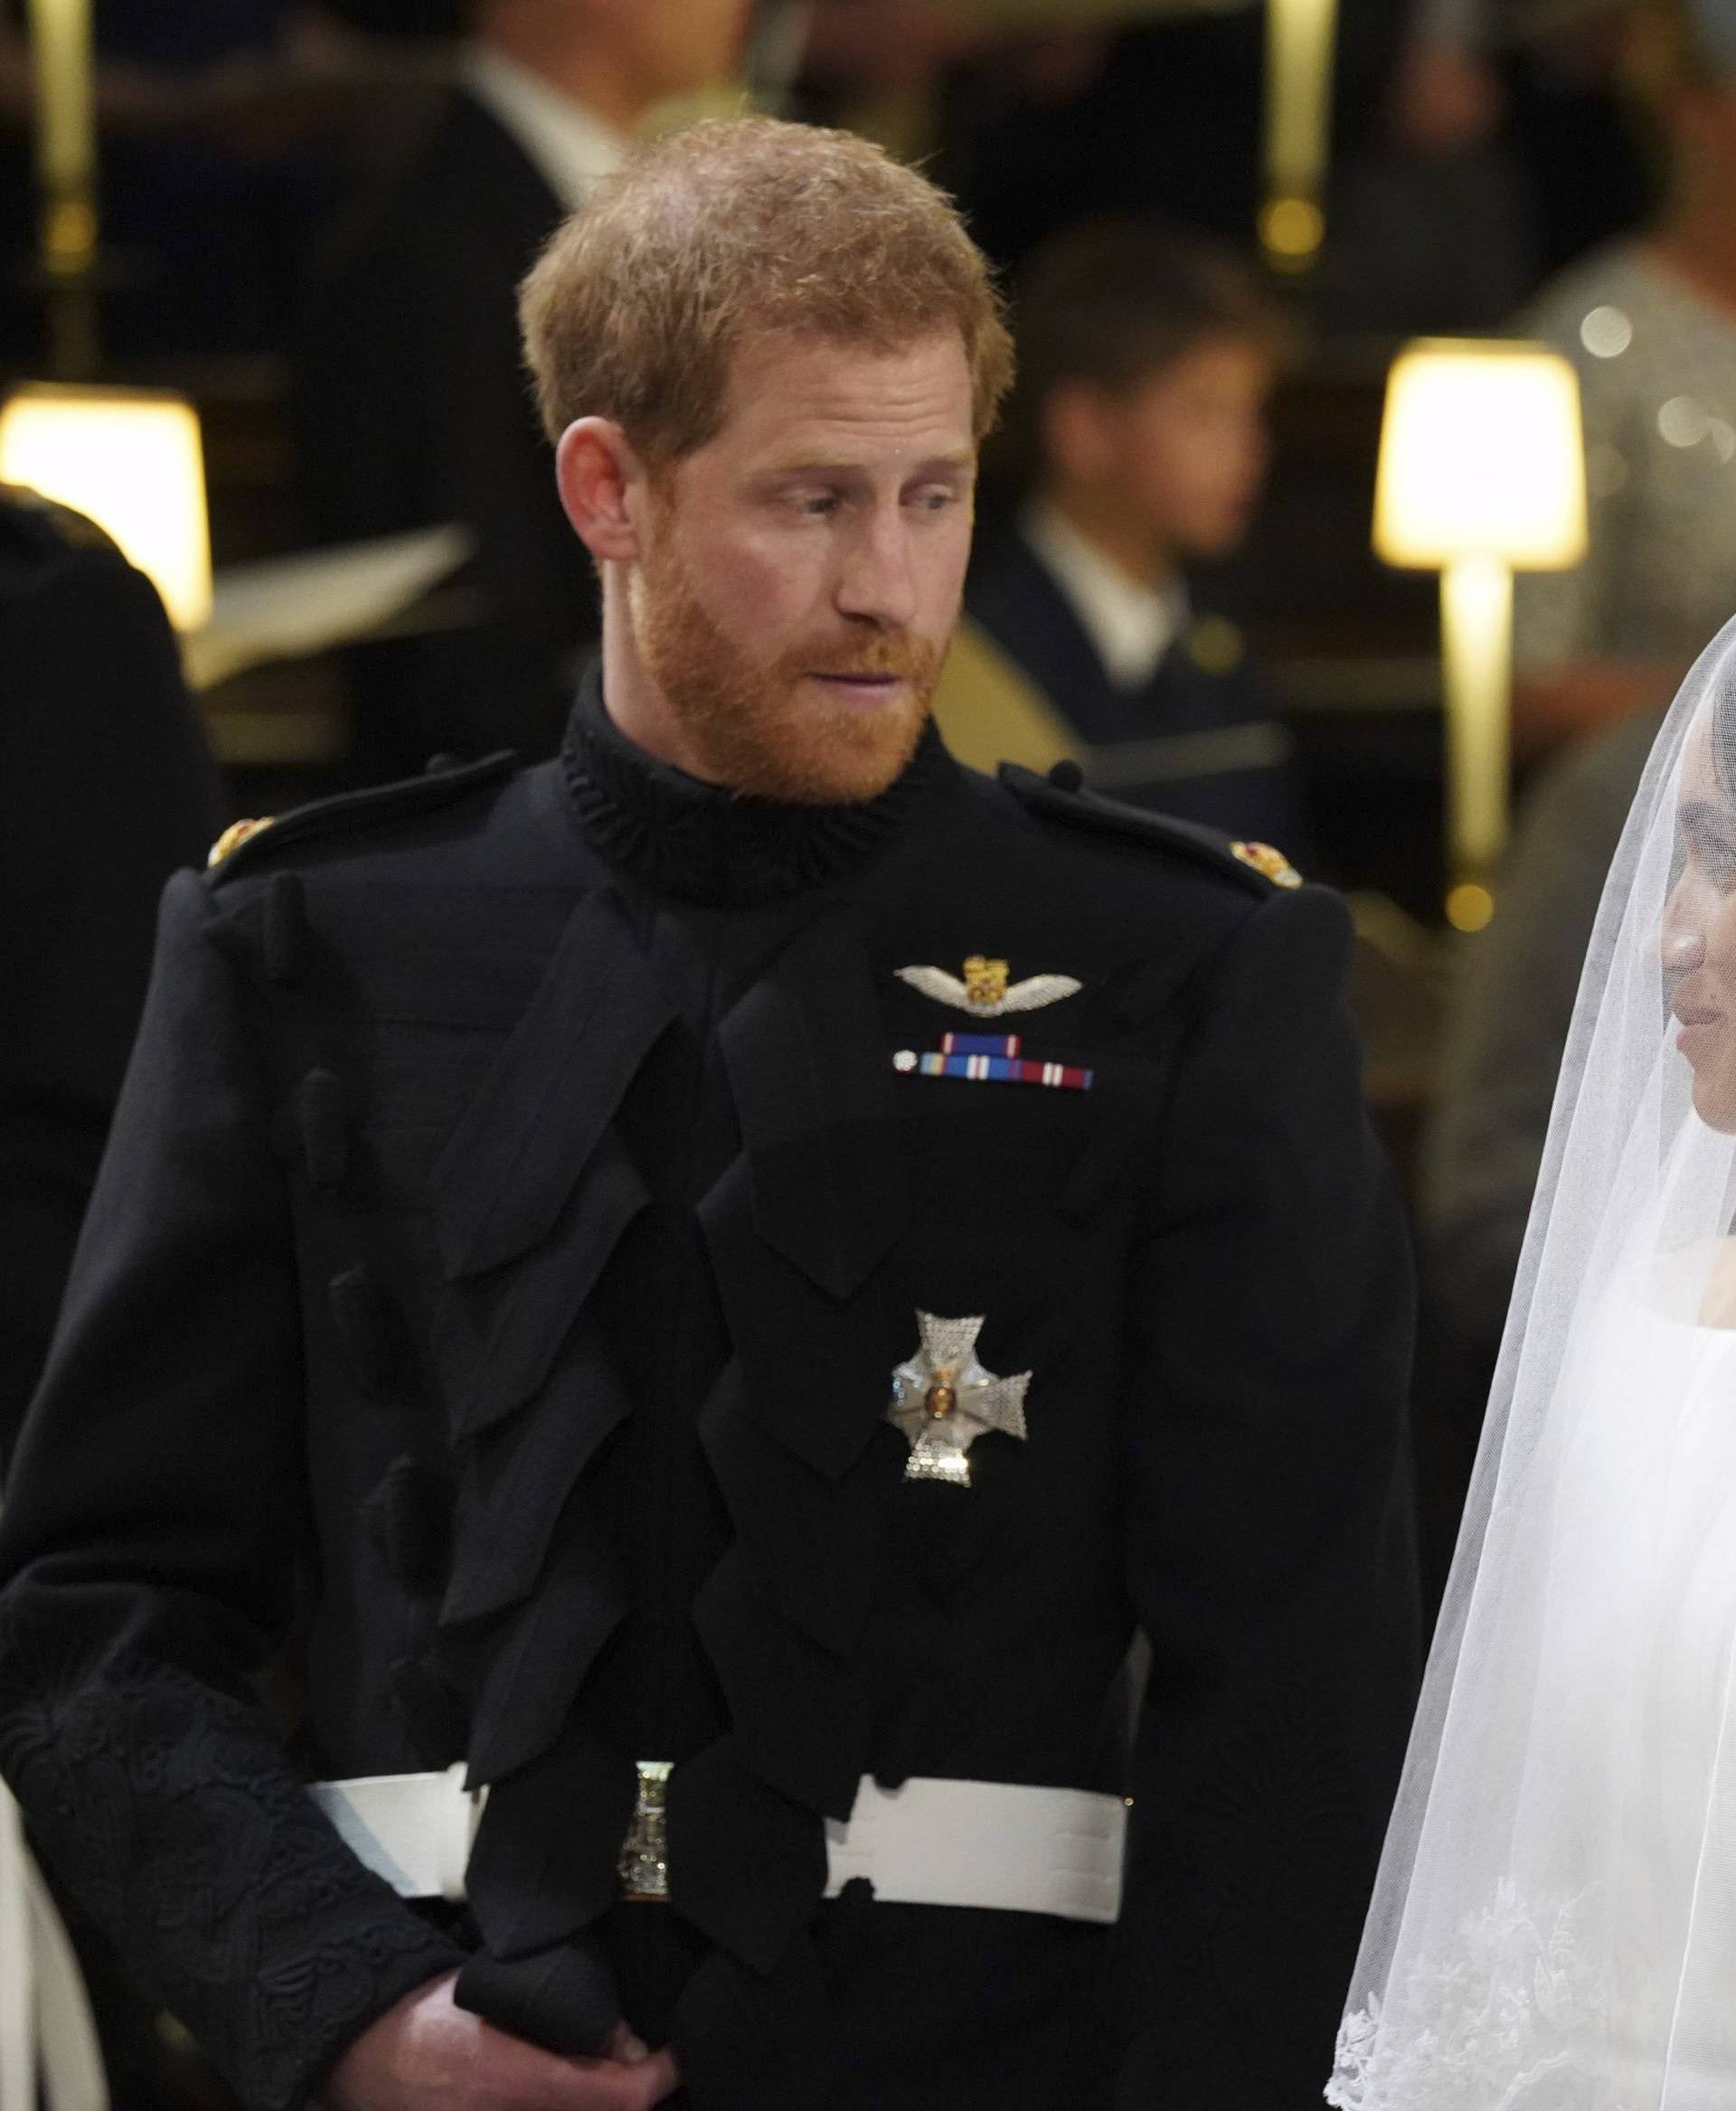 Royal Wedding 2018: Prince Harry Ties The Knot With Meghan Markle at St George's Chapel